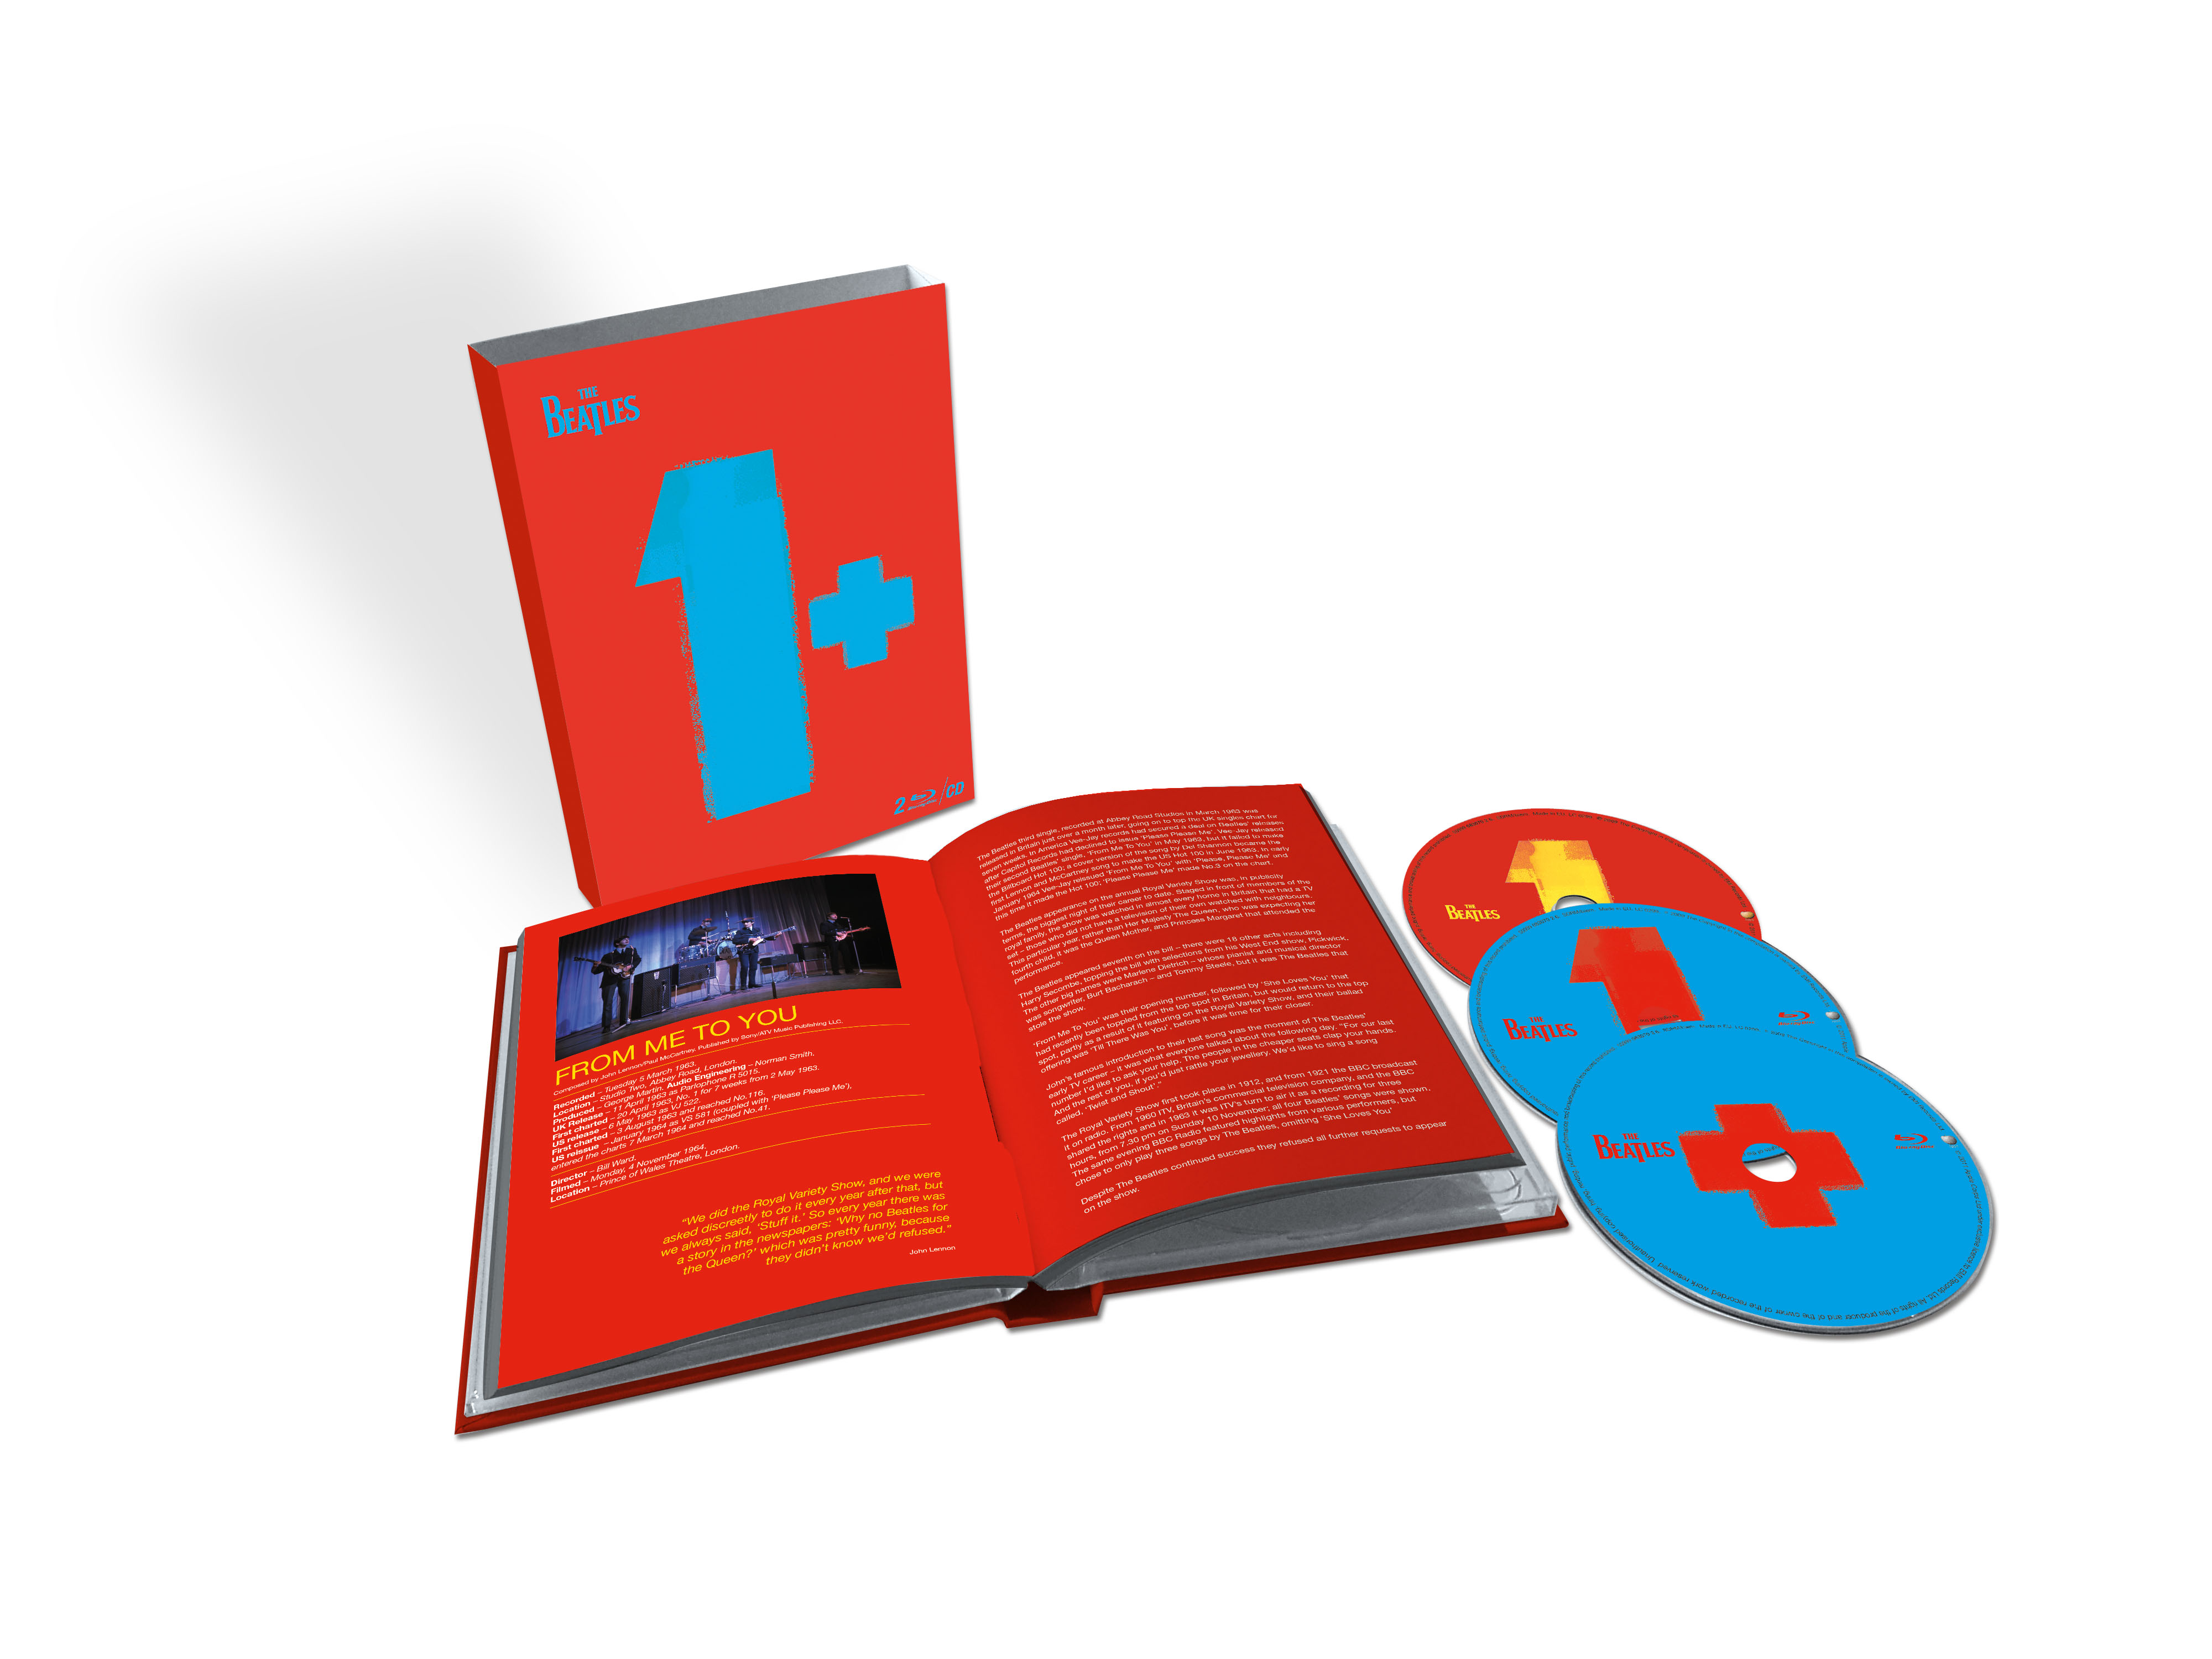 Disc) 1 + Beatles Deluxe CD Edition - 2 Blu-ray (CD + (Ltd. Blu-ray) - The